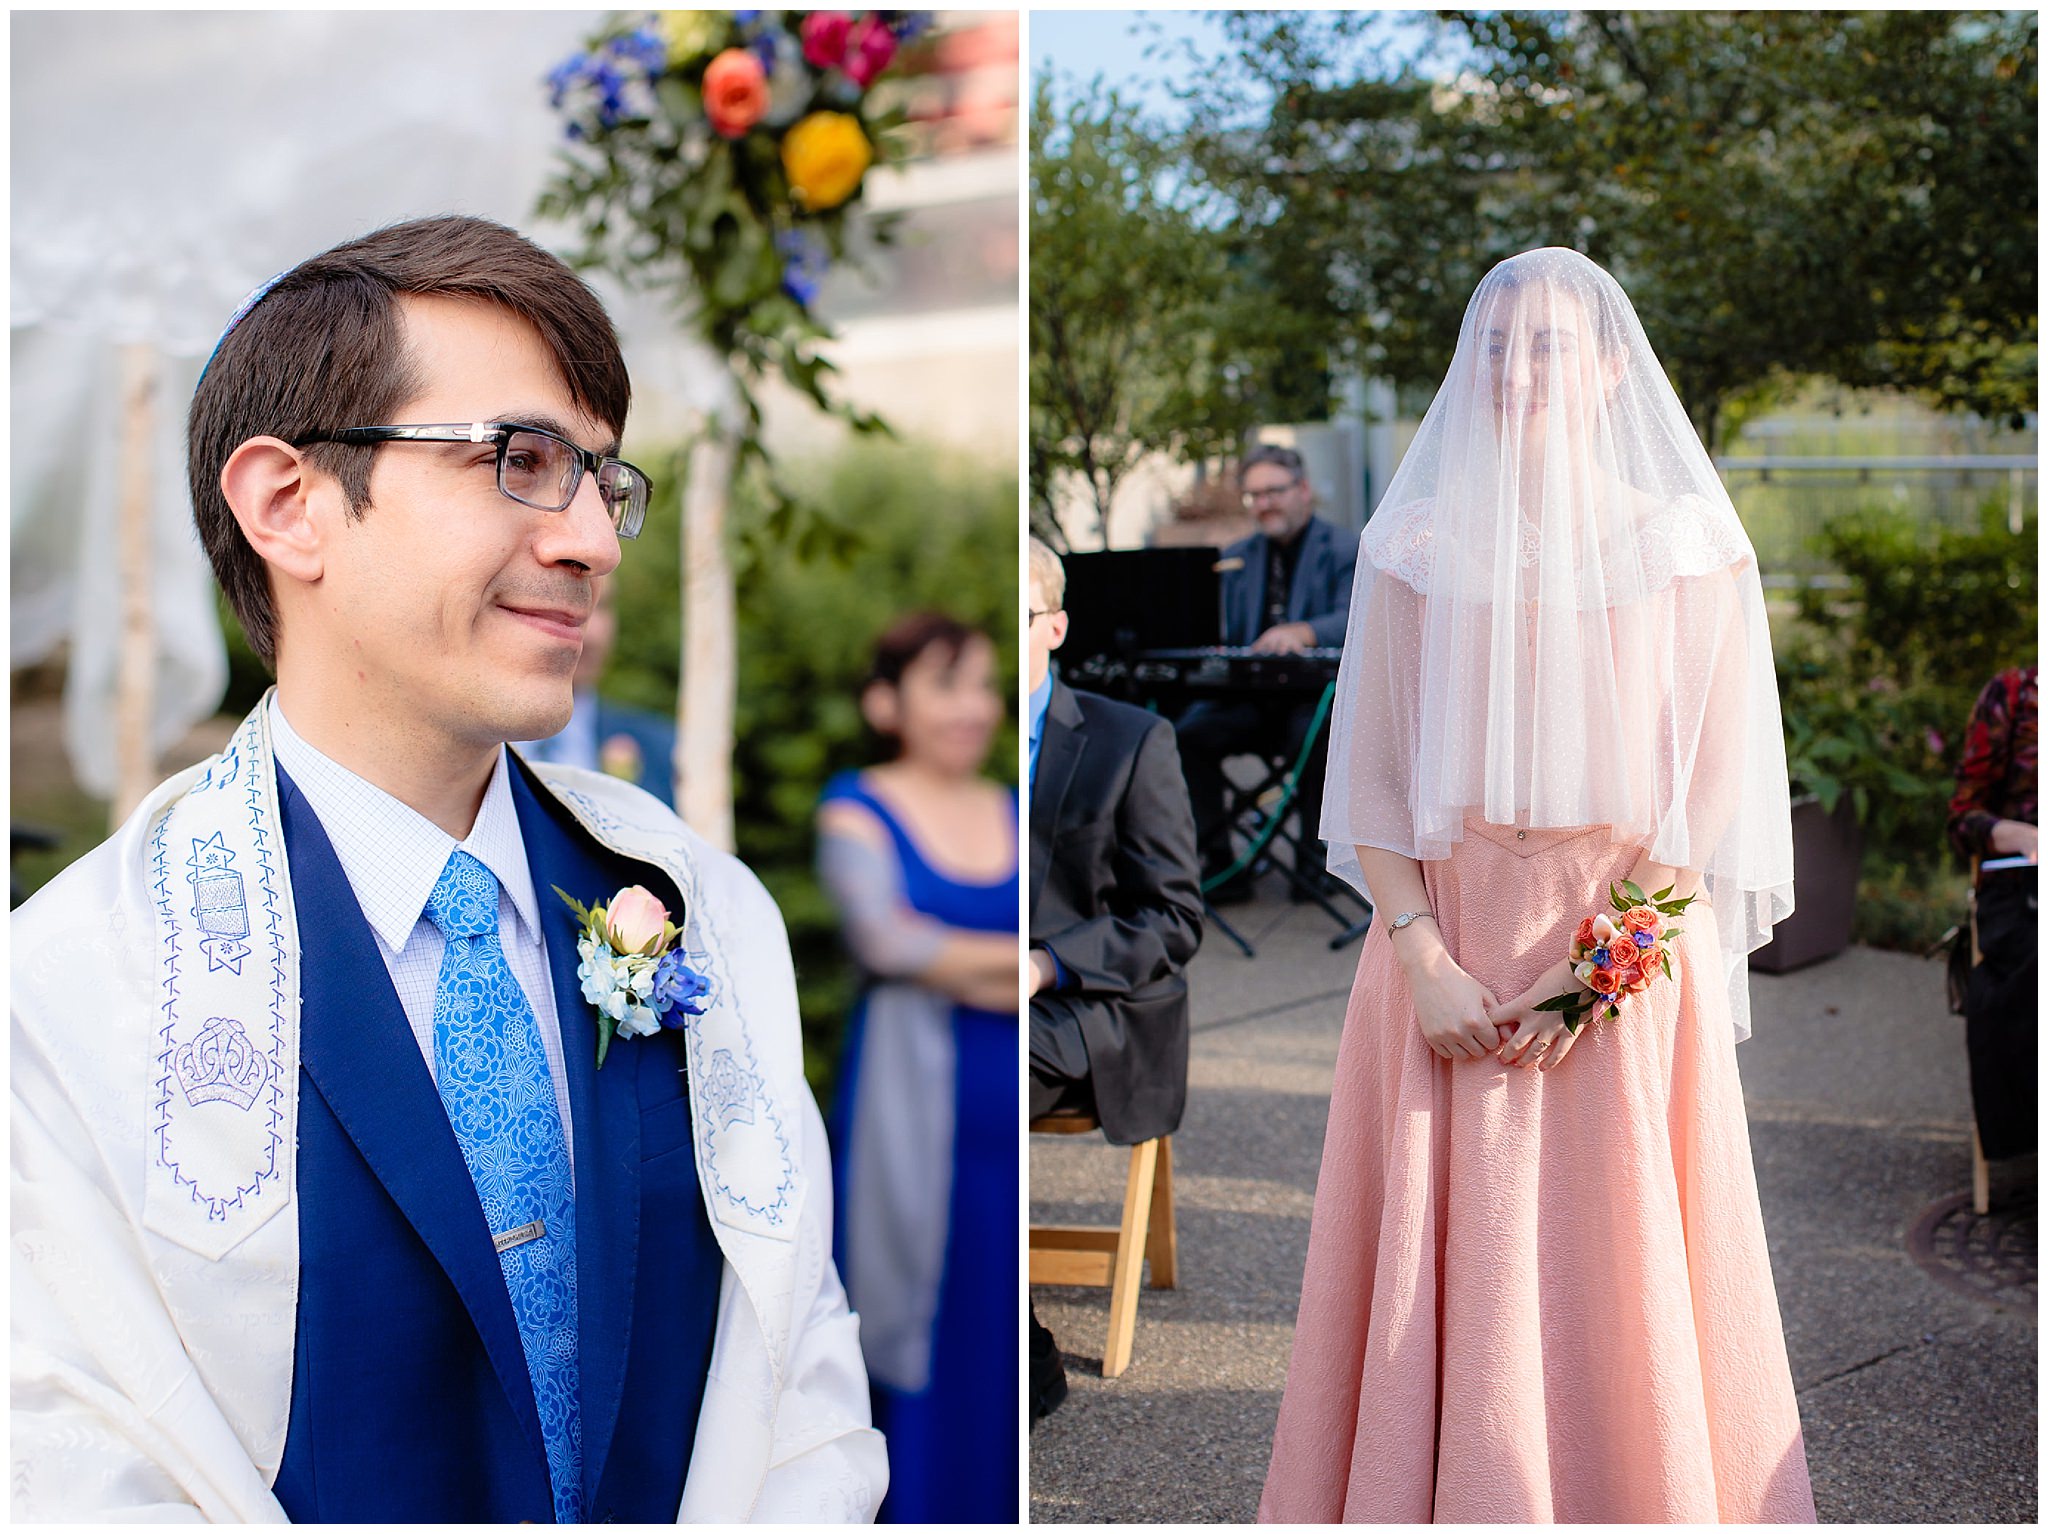 Groom smiles as his bride walks down the aisle at Phipps Conservatory